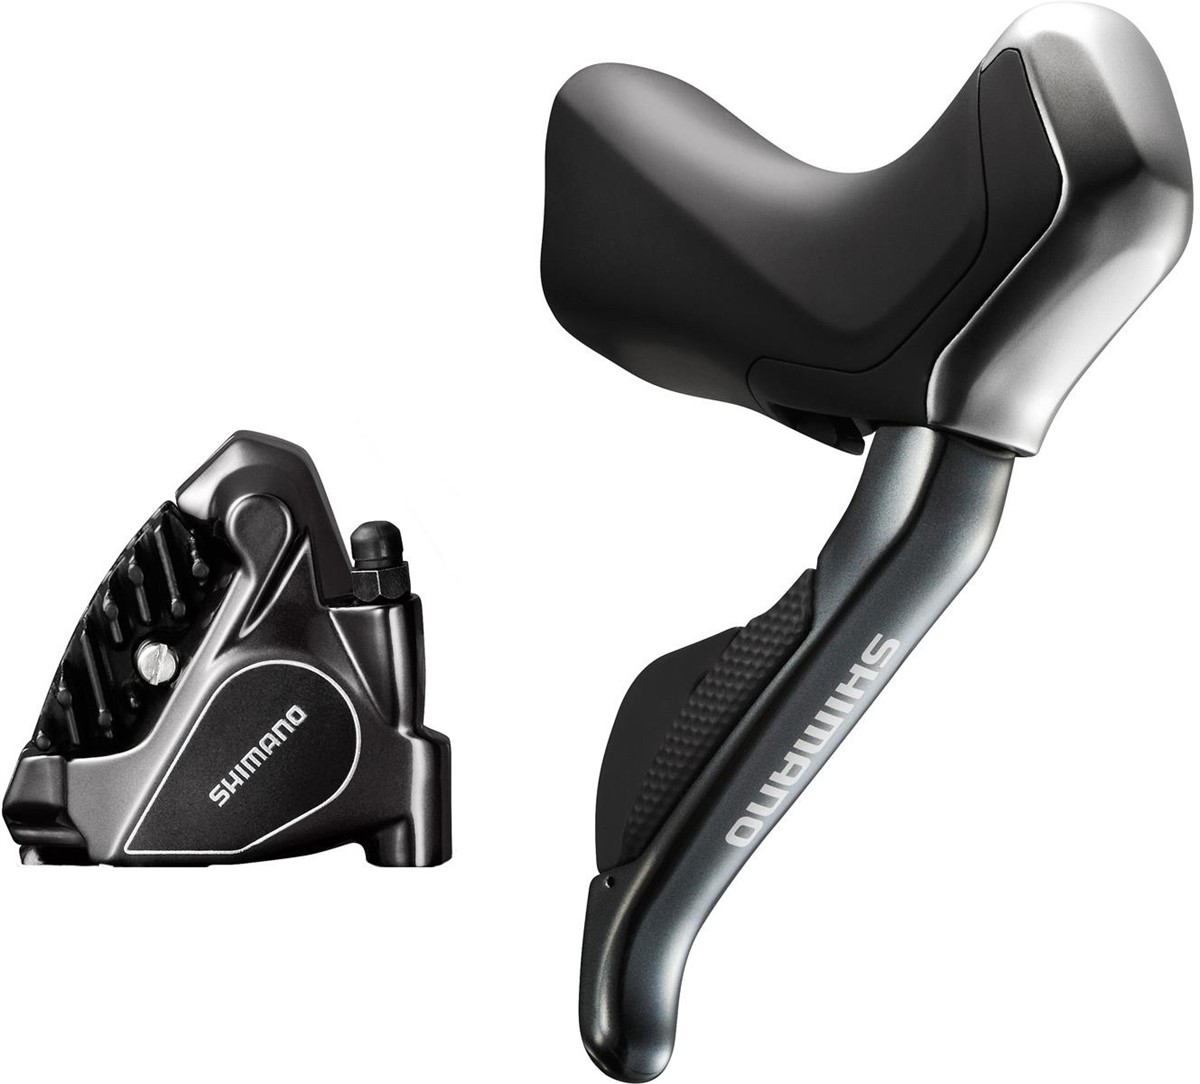 Shimano ST-R785 Hydraulic Disc Brake Lever Di2 product image